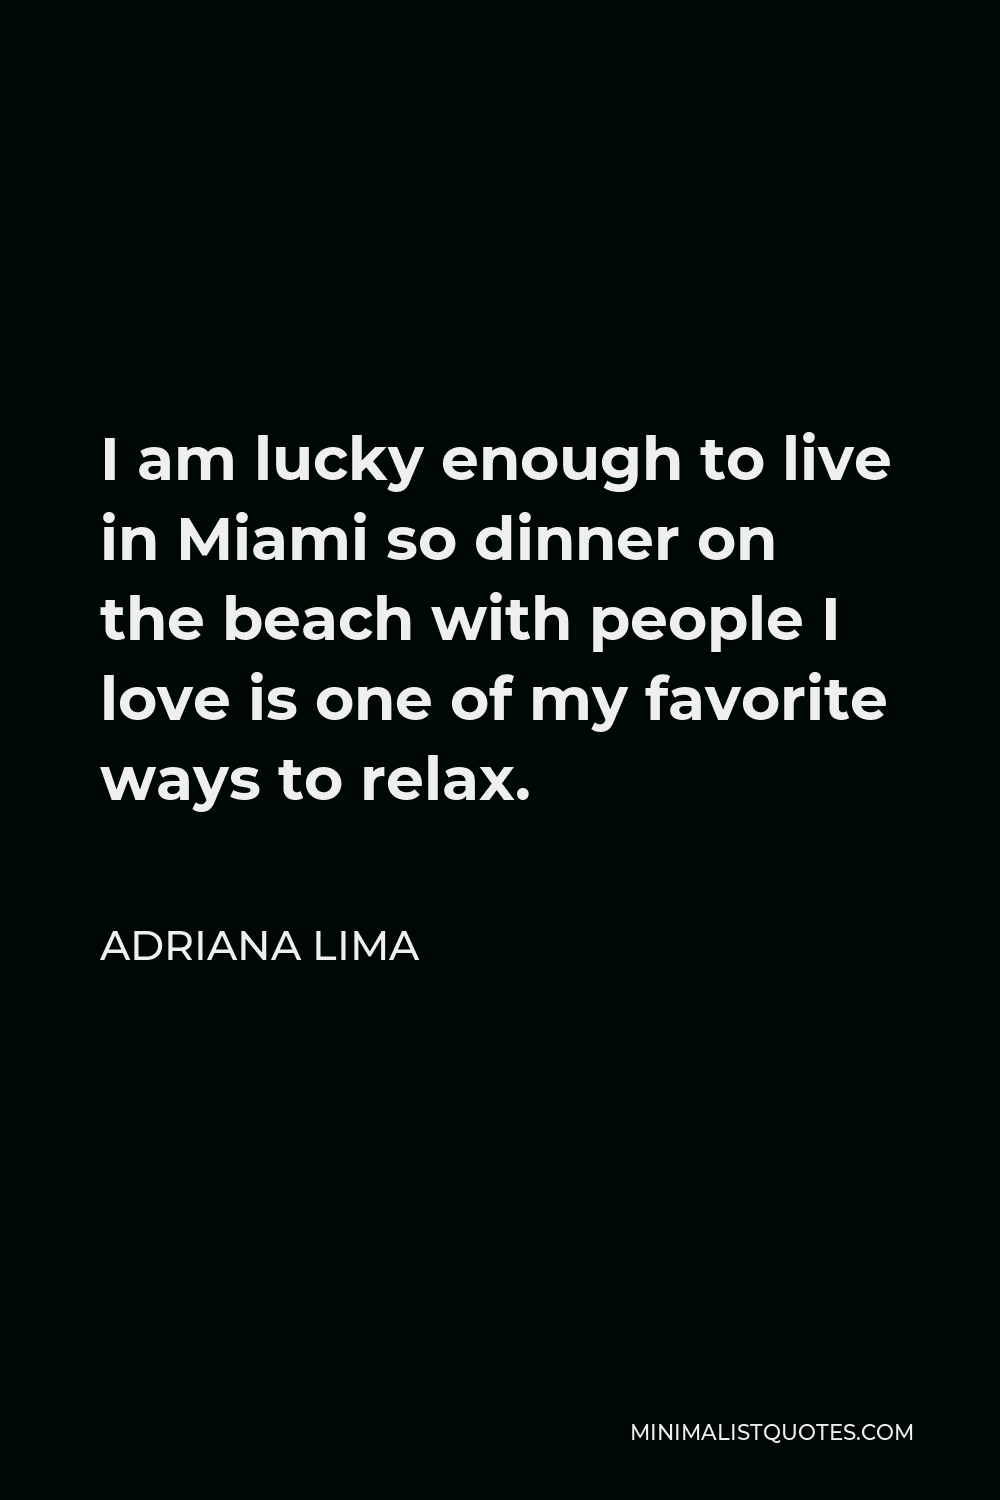 Adriana Lima Quote - I am lucky enough to live in Miami so dinner on the beach with people I love is one of my favorite ways to relax.